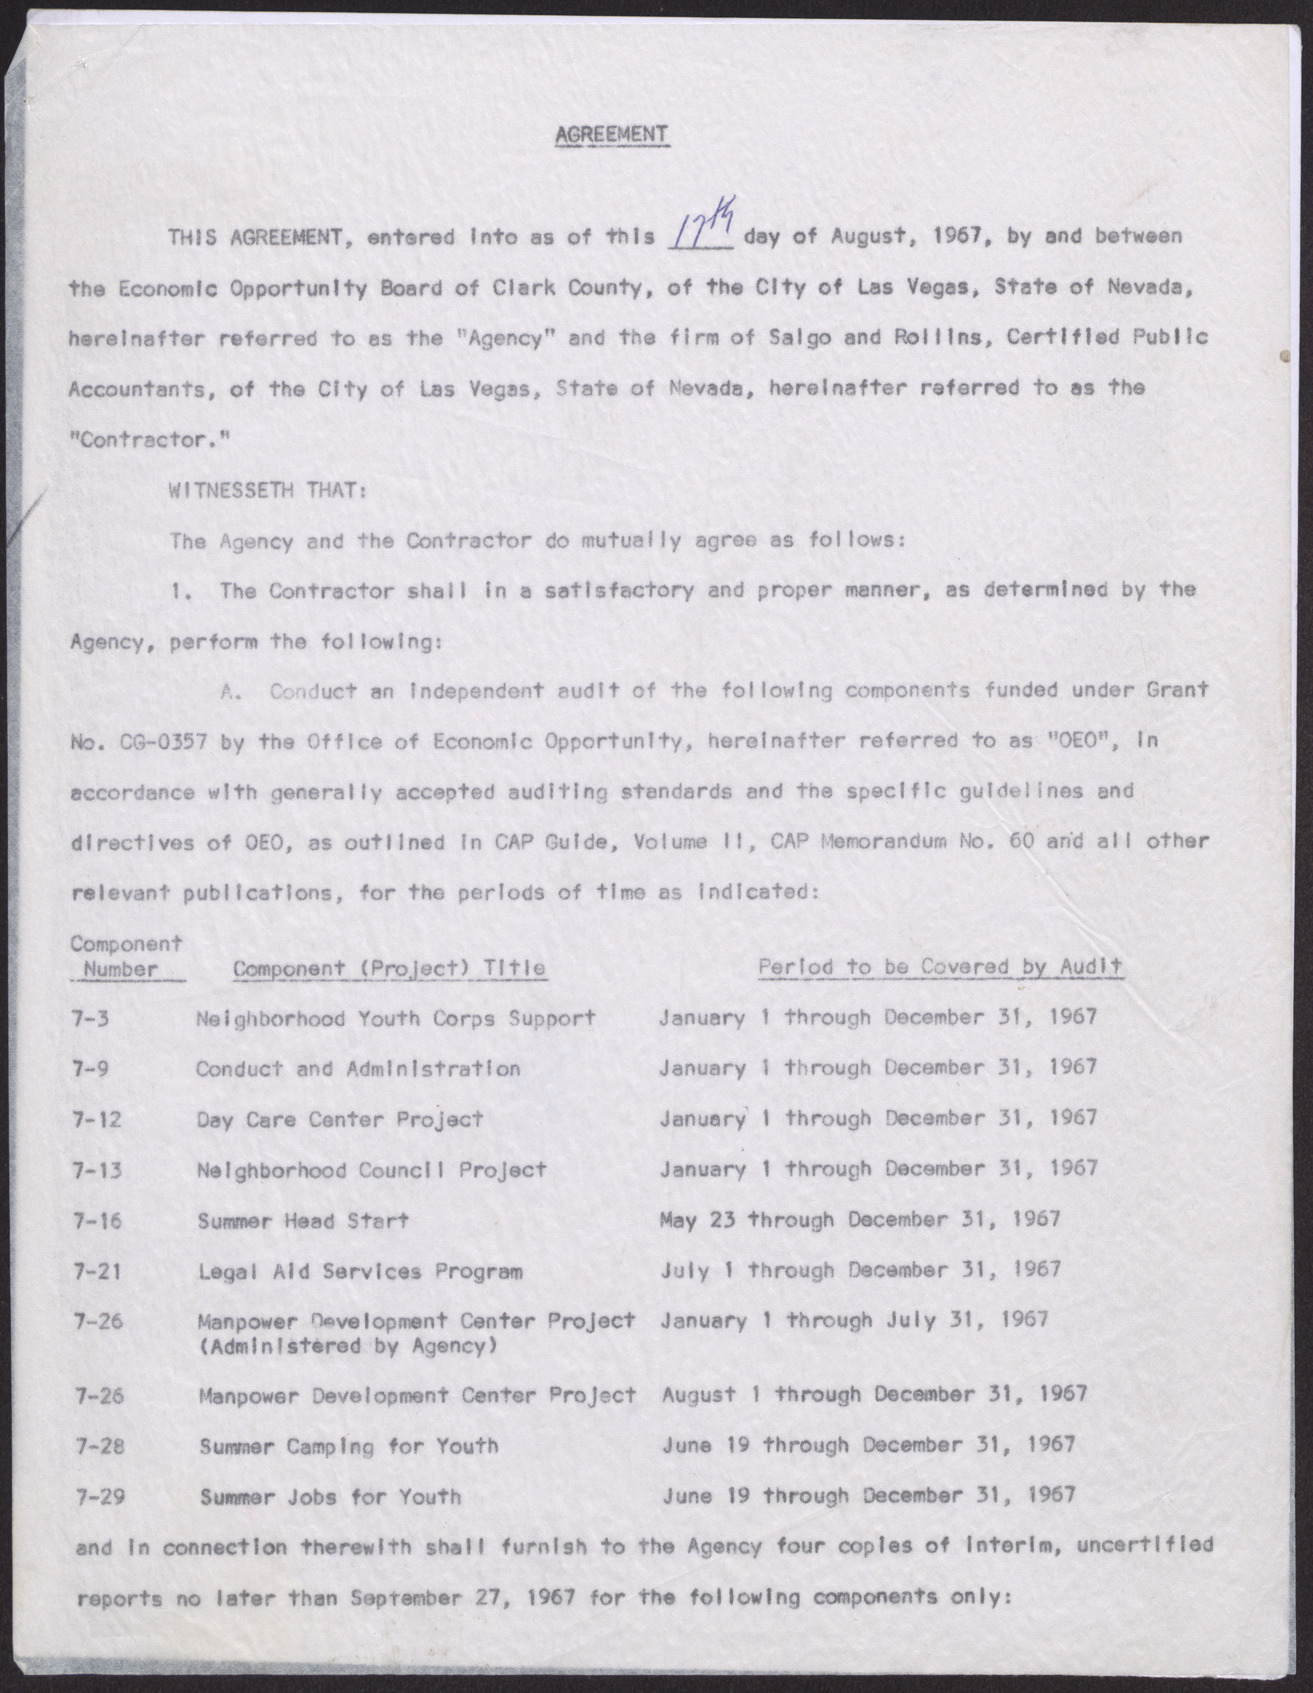 Agreement between the Economic Opportunity Board of Clark County and the accounting firm of Salgo and Rollins, August 17, 1967